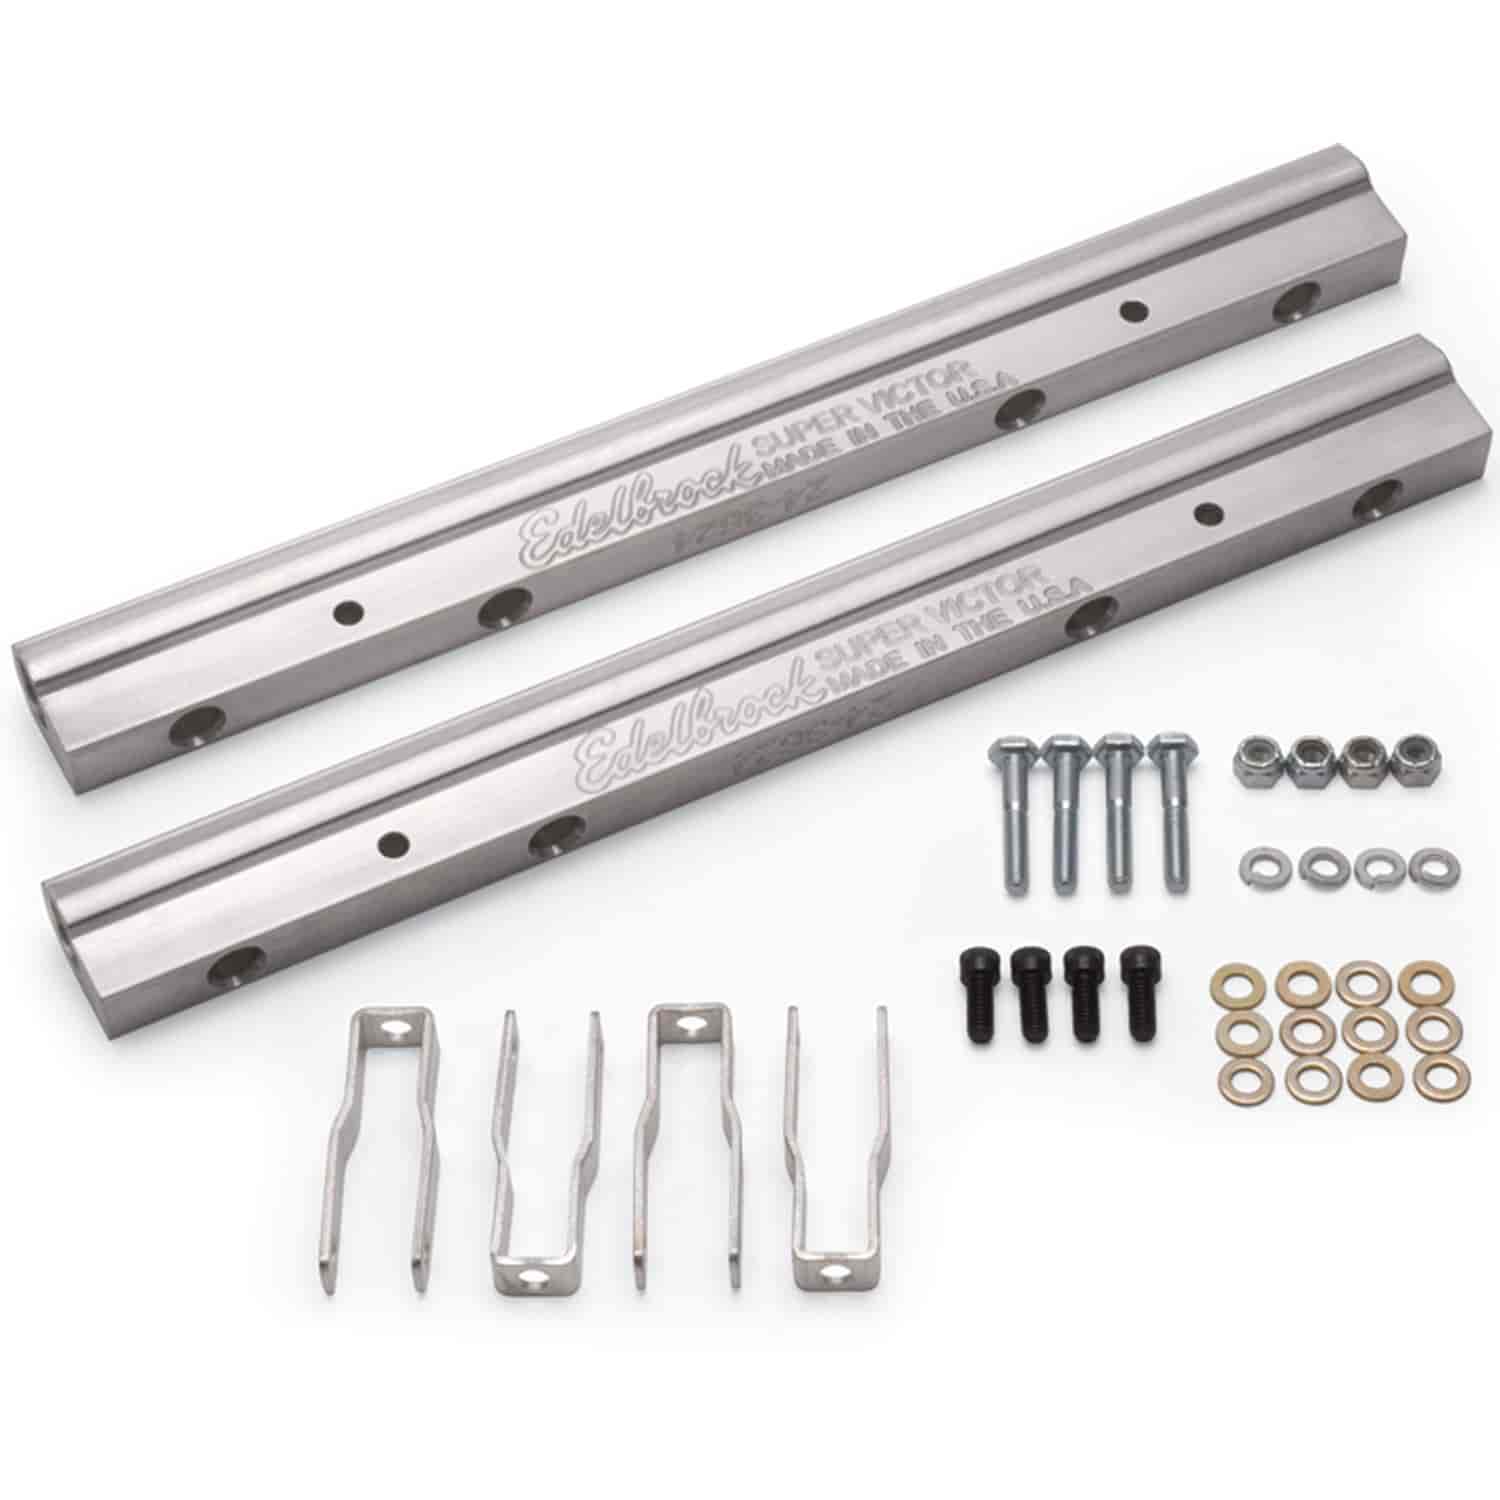 Fuel Rail Kit for Big Victor EFI Manifolds -08 AN Inlet